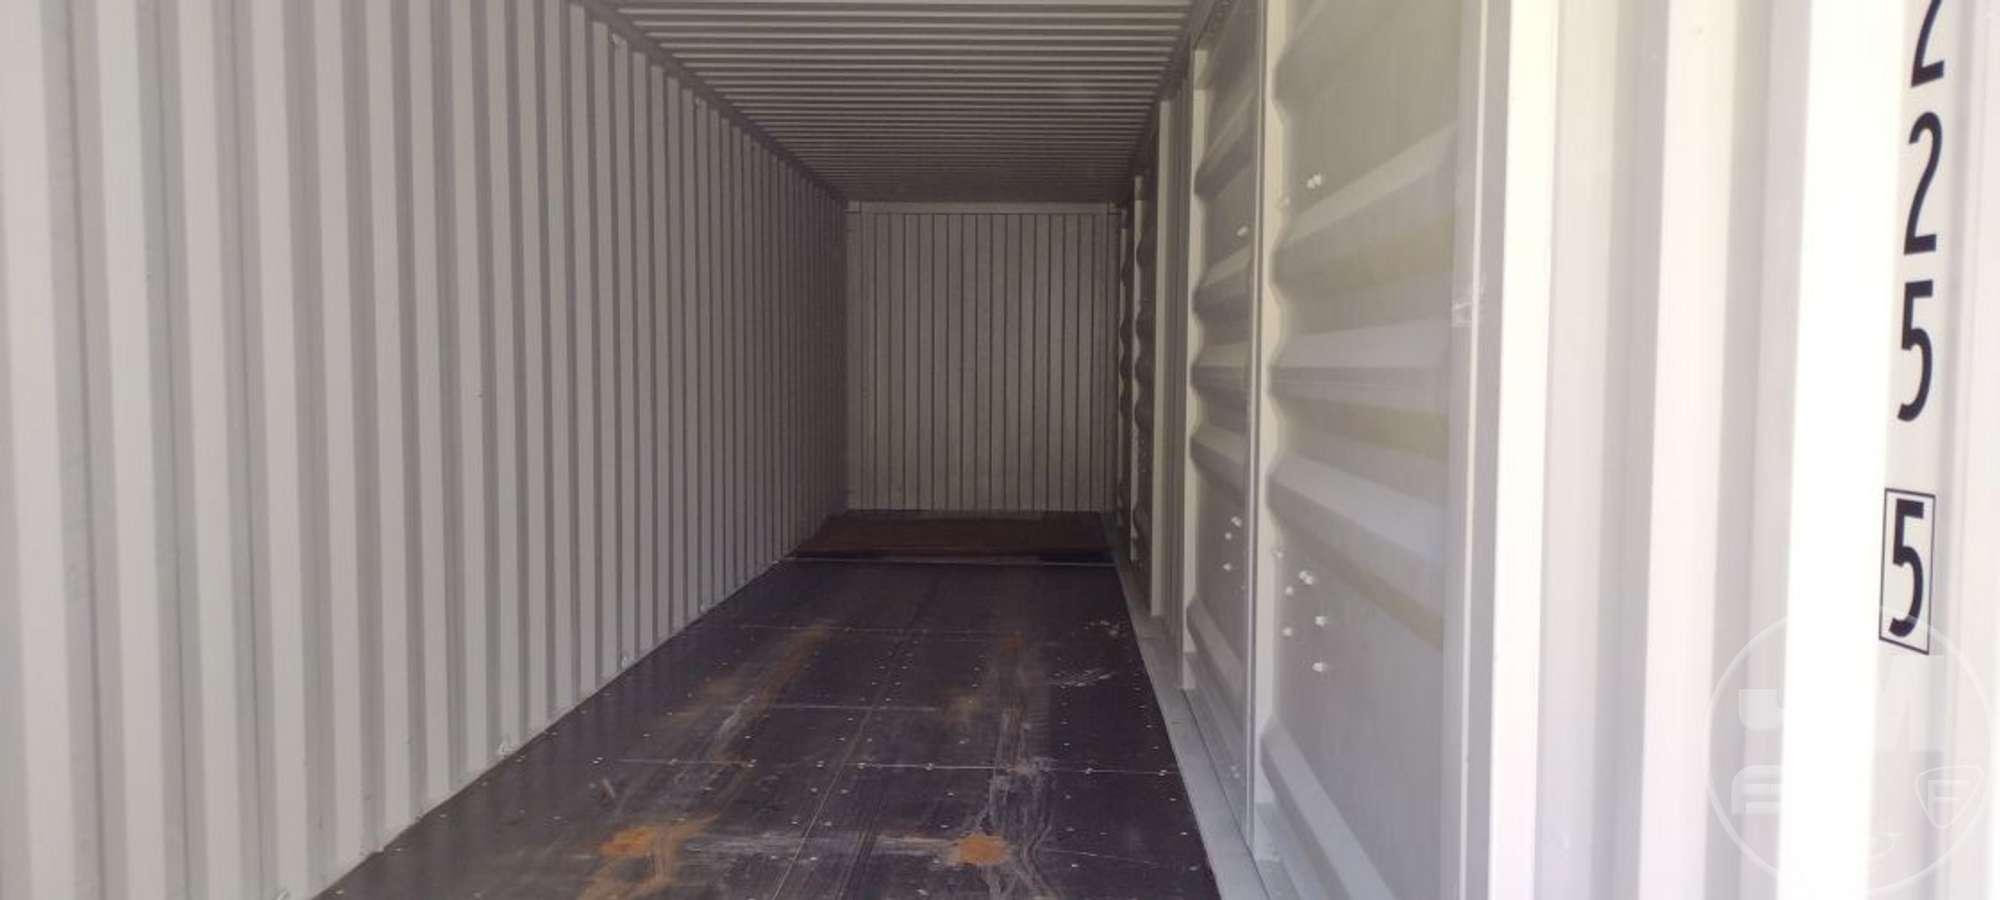 2024 40' CONTAINER SN: LYPU0152255